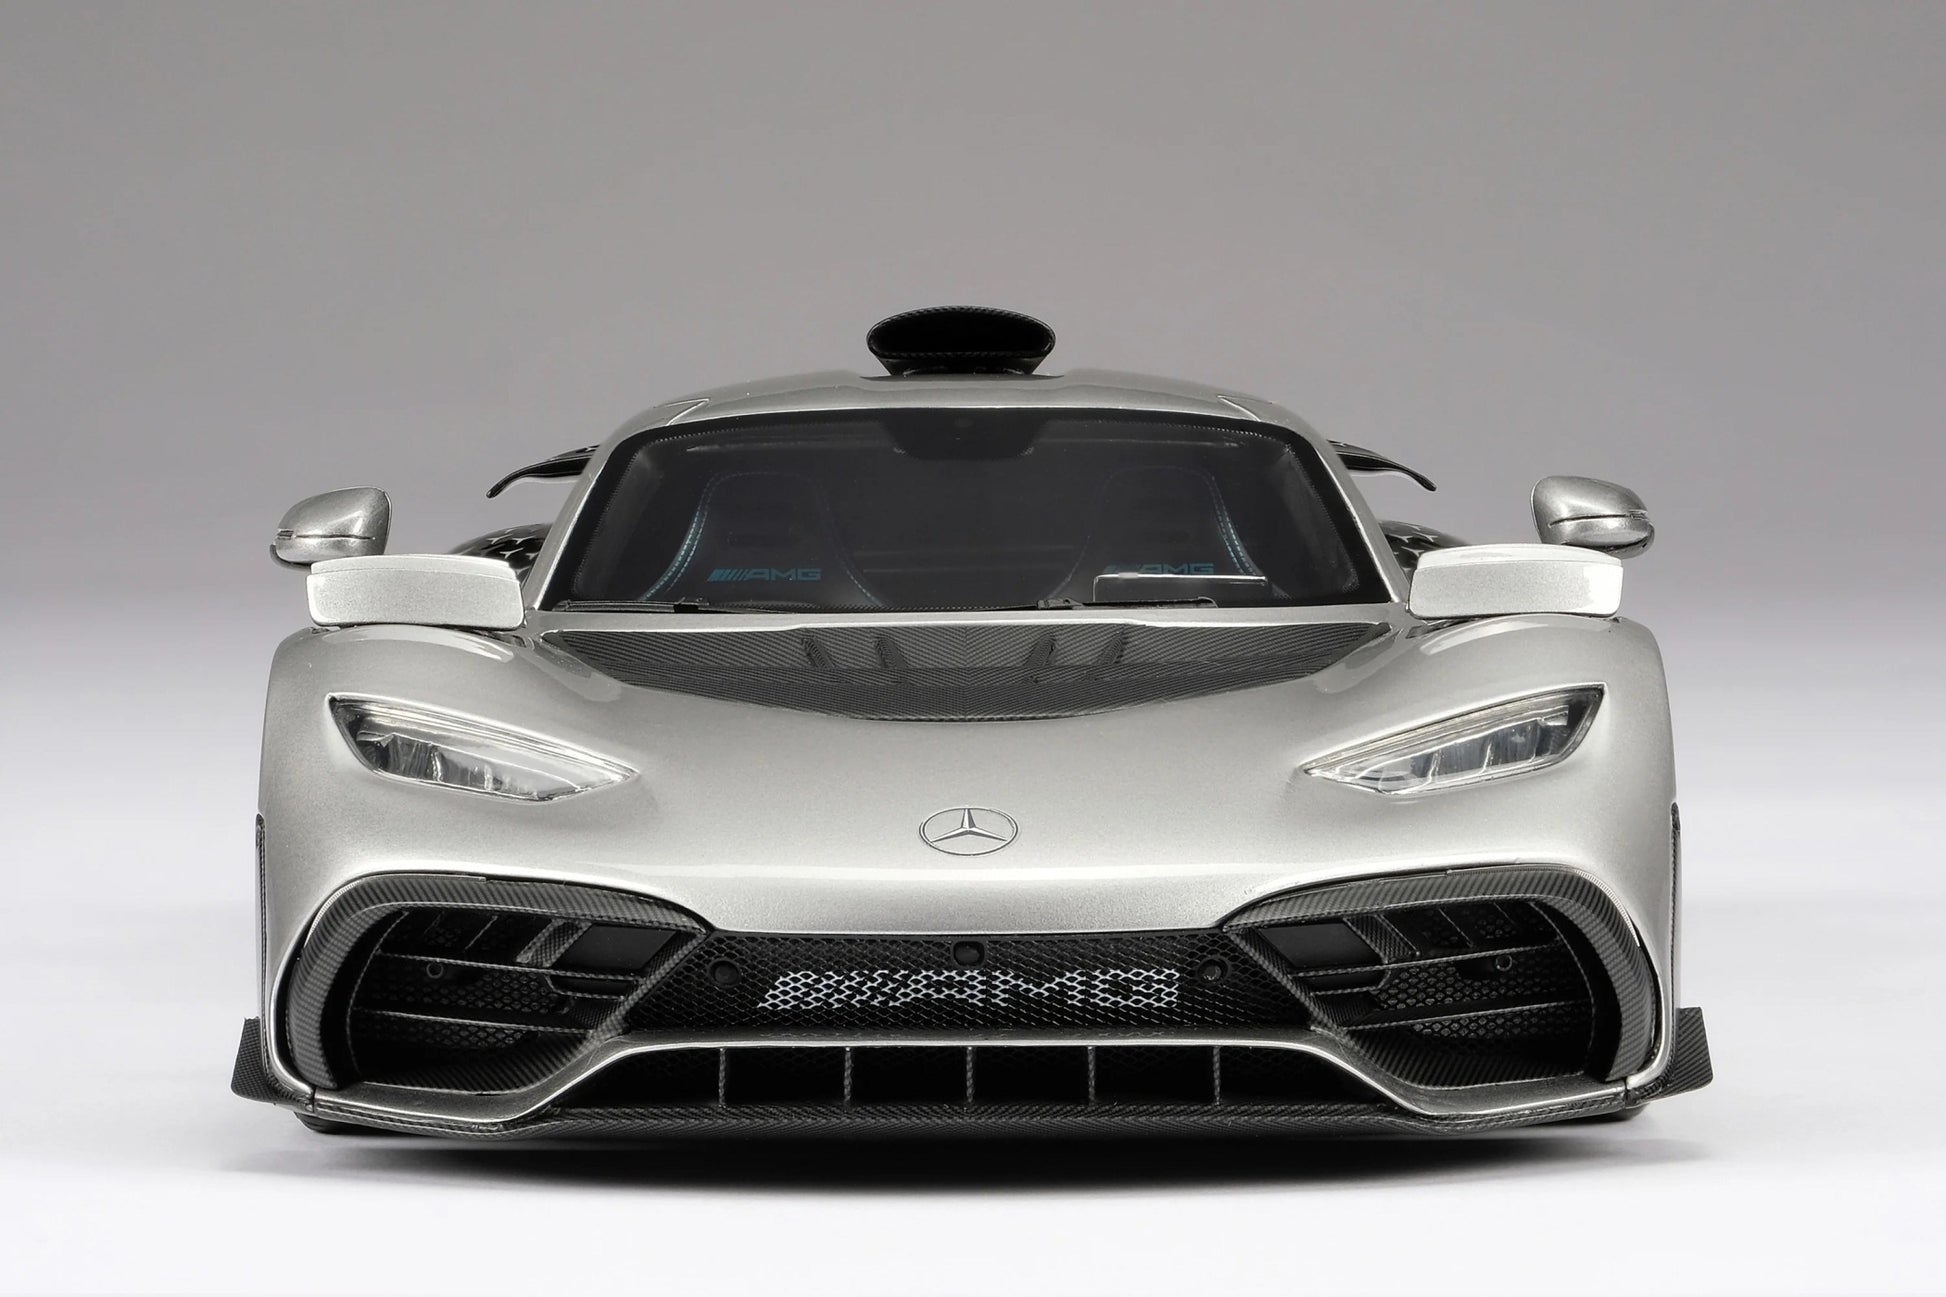 Amalgam Collection Mercedes-AMG One 1:8 Model Car | Exquisite Model Reproduction, Luxury Collector's Item | 2Jour Concierge, #1 luxury high-end gift & lifestyle shop